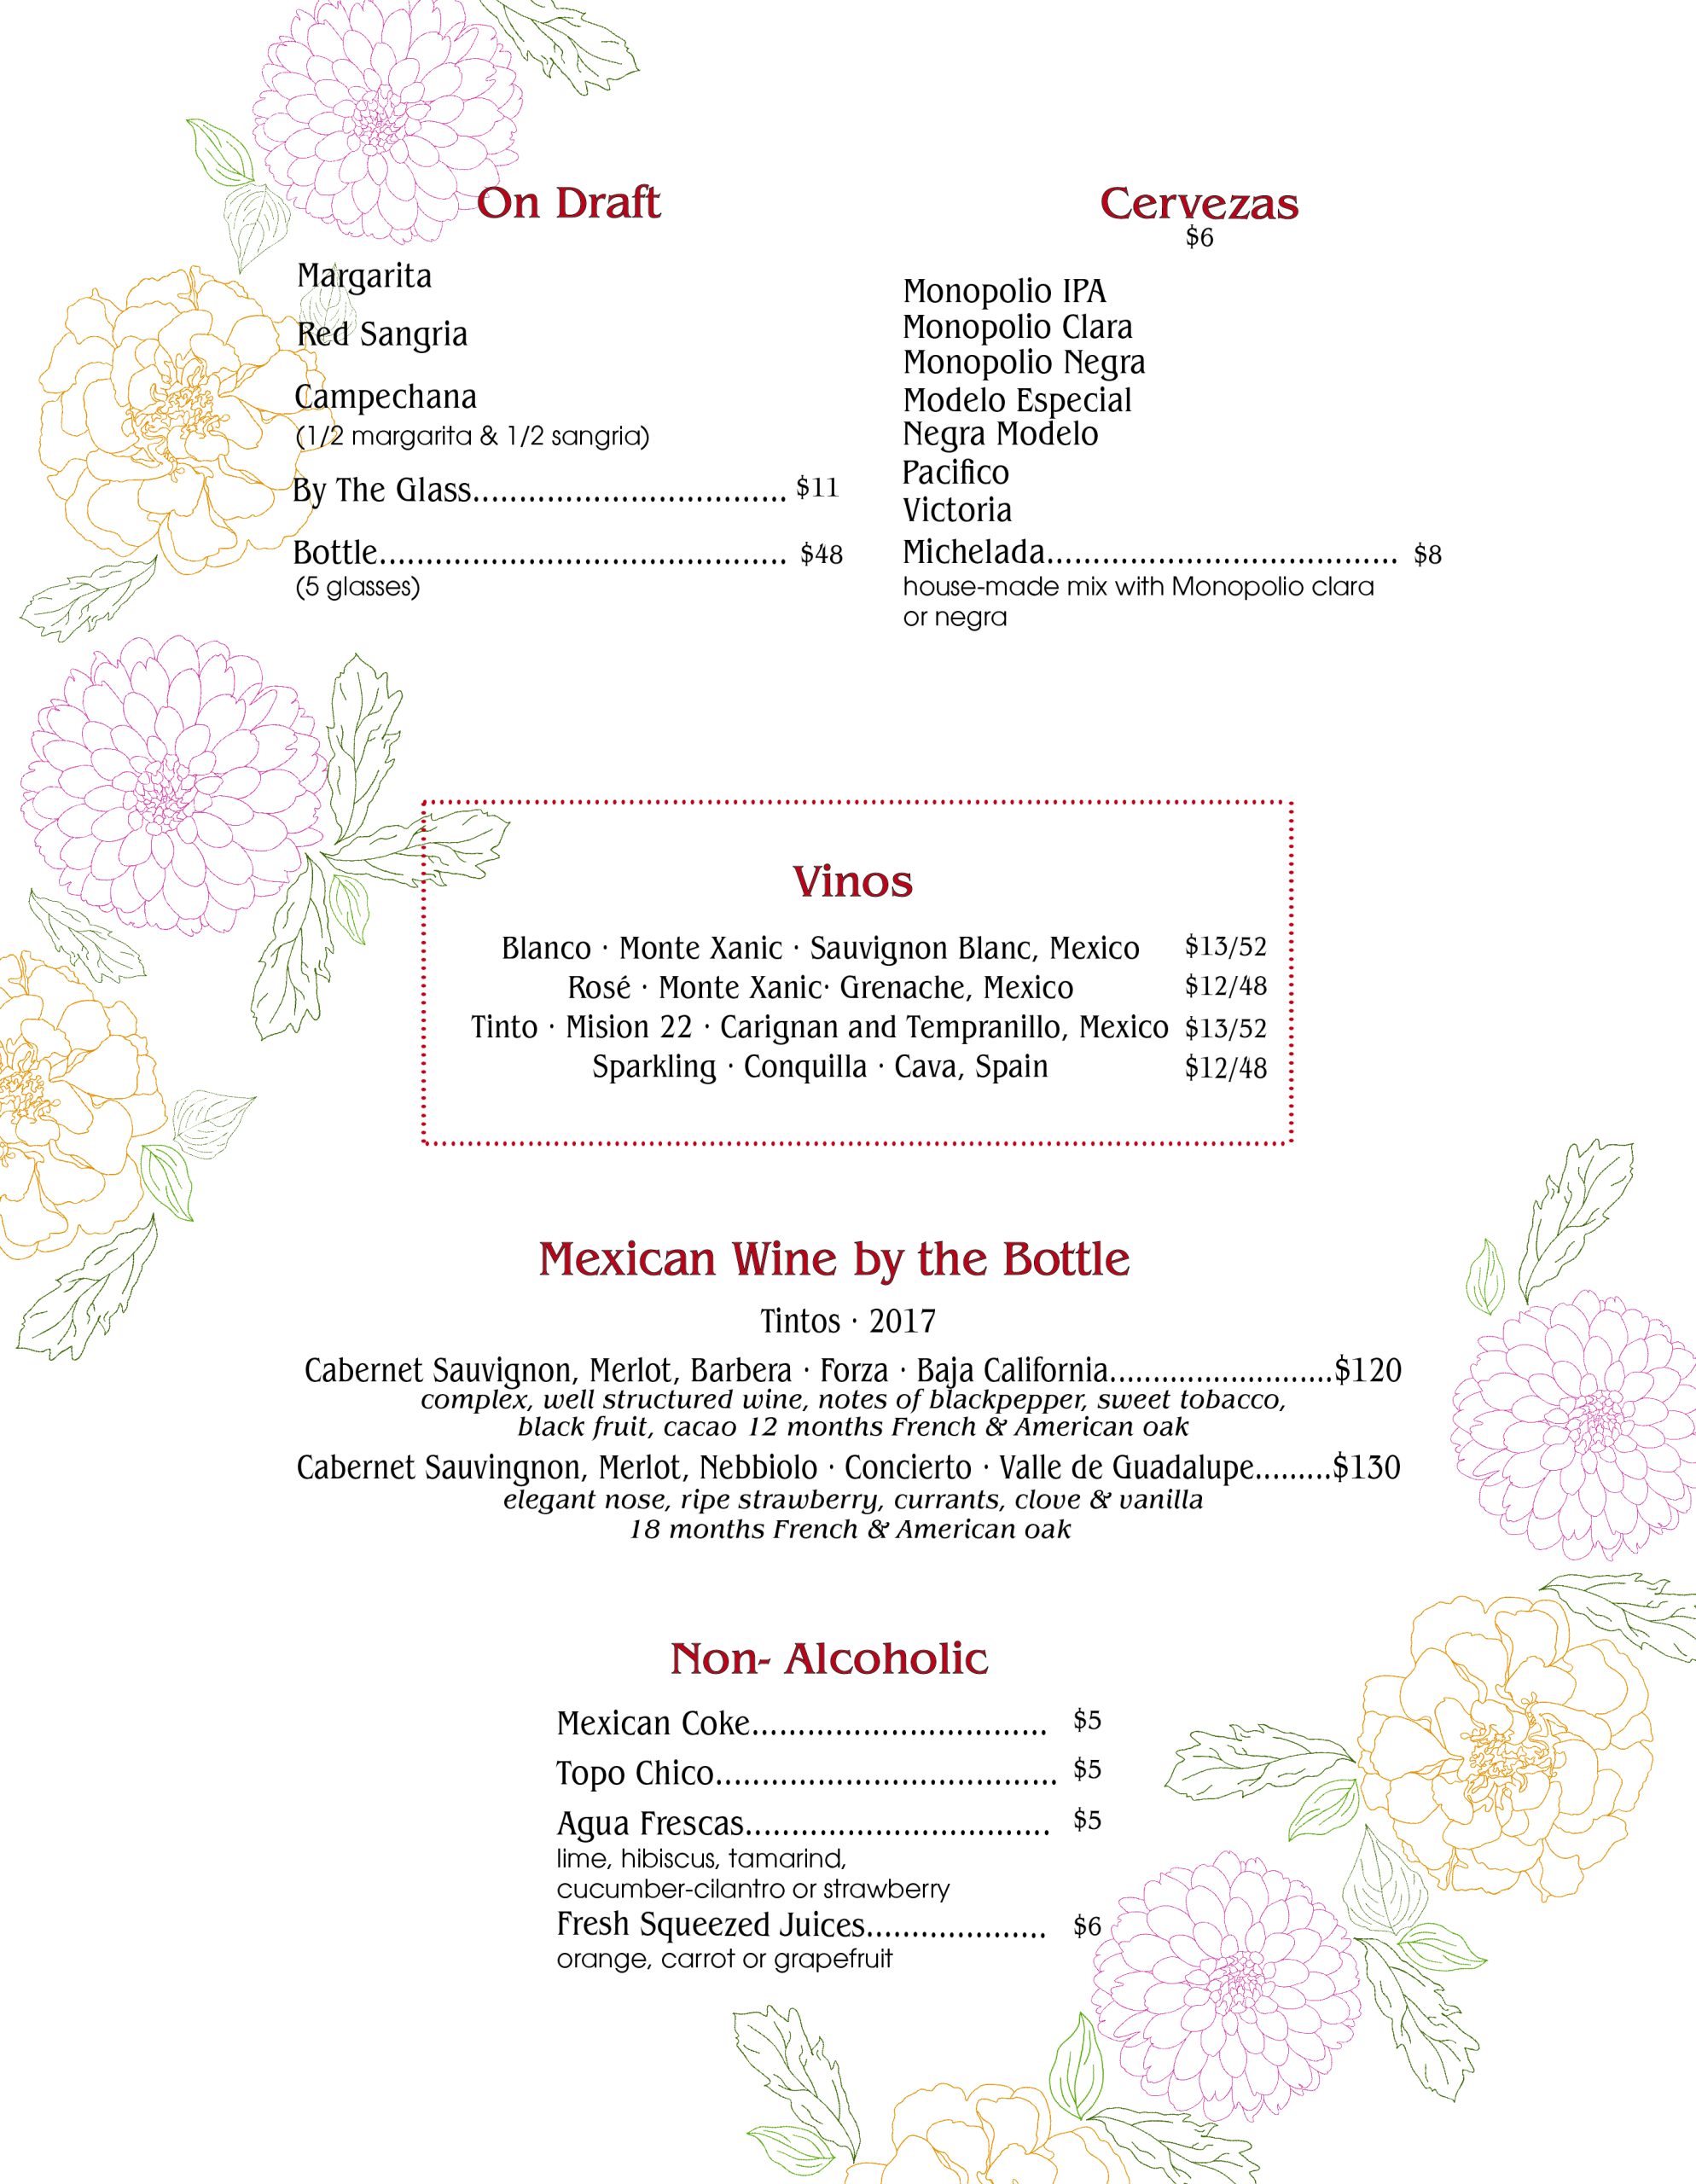 Chavela’s Wine and Beer Menu as well as non-alcoholic beverages such as Mexican coke, fresh squeezed juices, and agua frescas